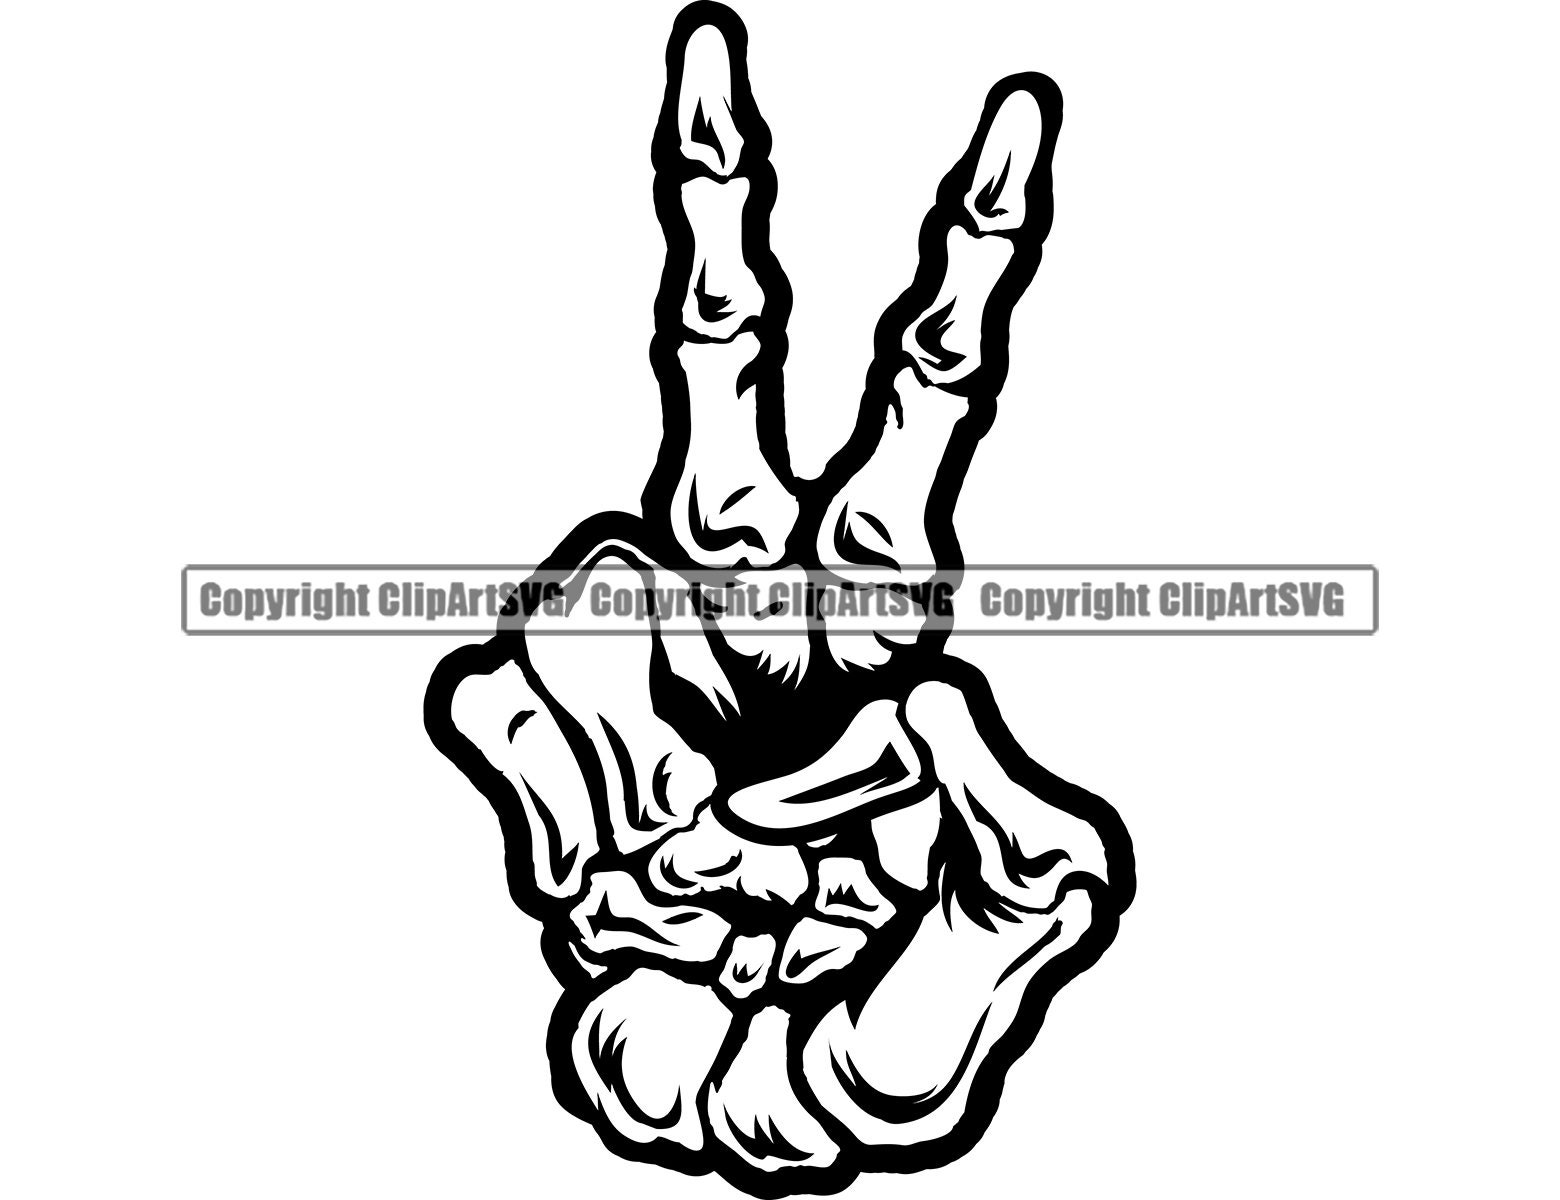 908 Skeleton Peace Sign Images Stock Photos  Vectors  Shutterstock